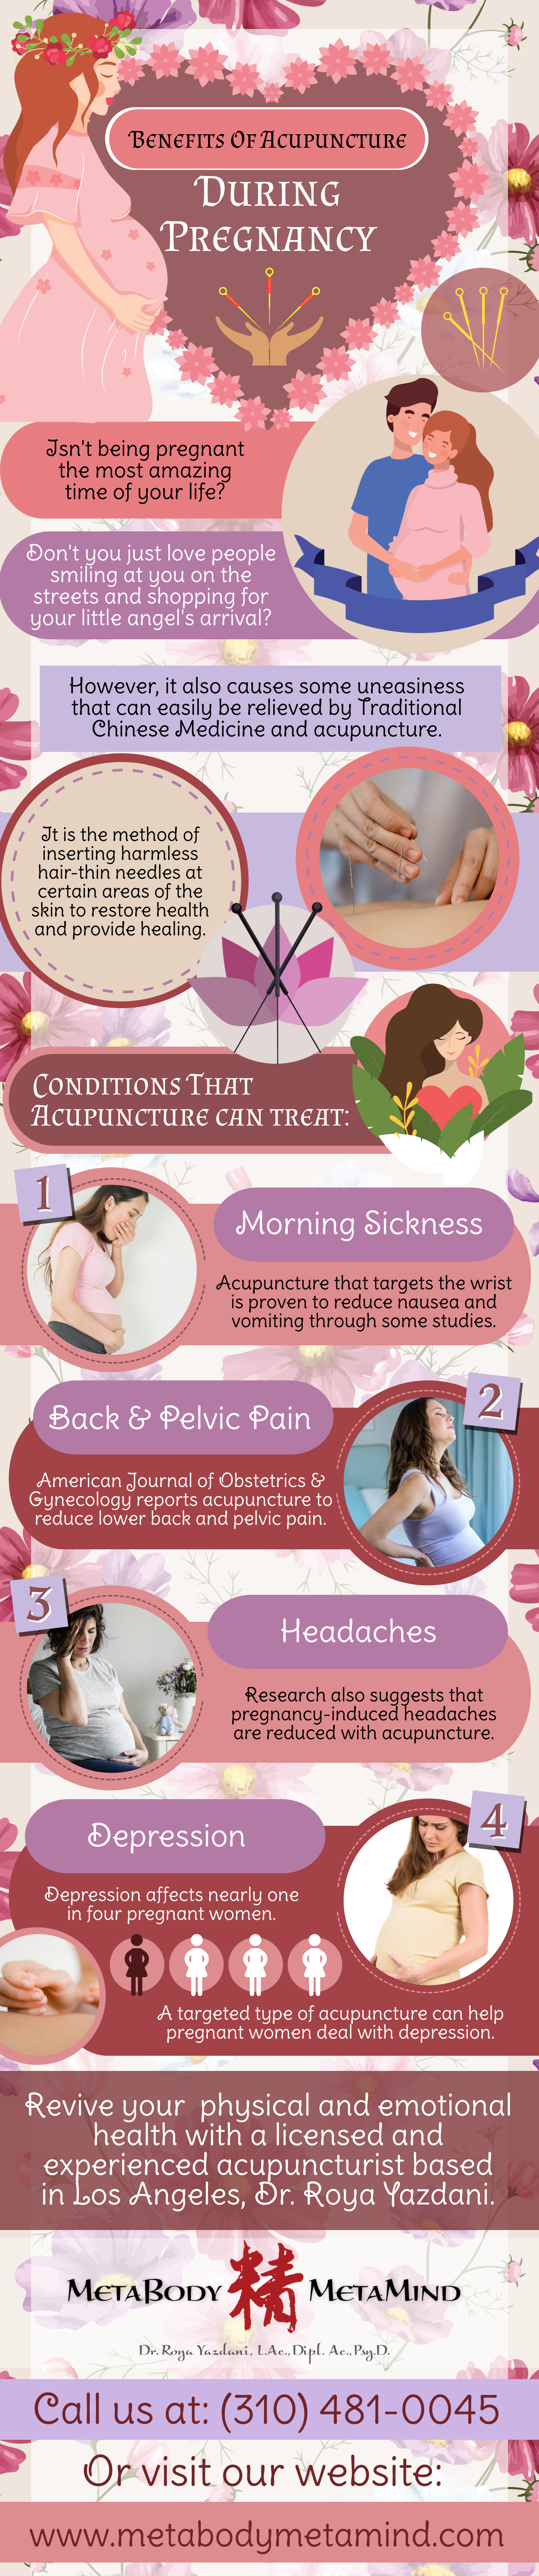 Benefits of acupuncture during pregnancy